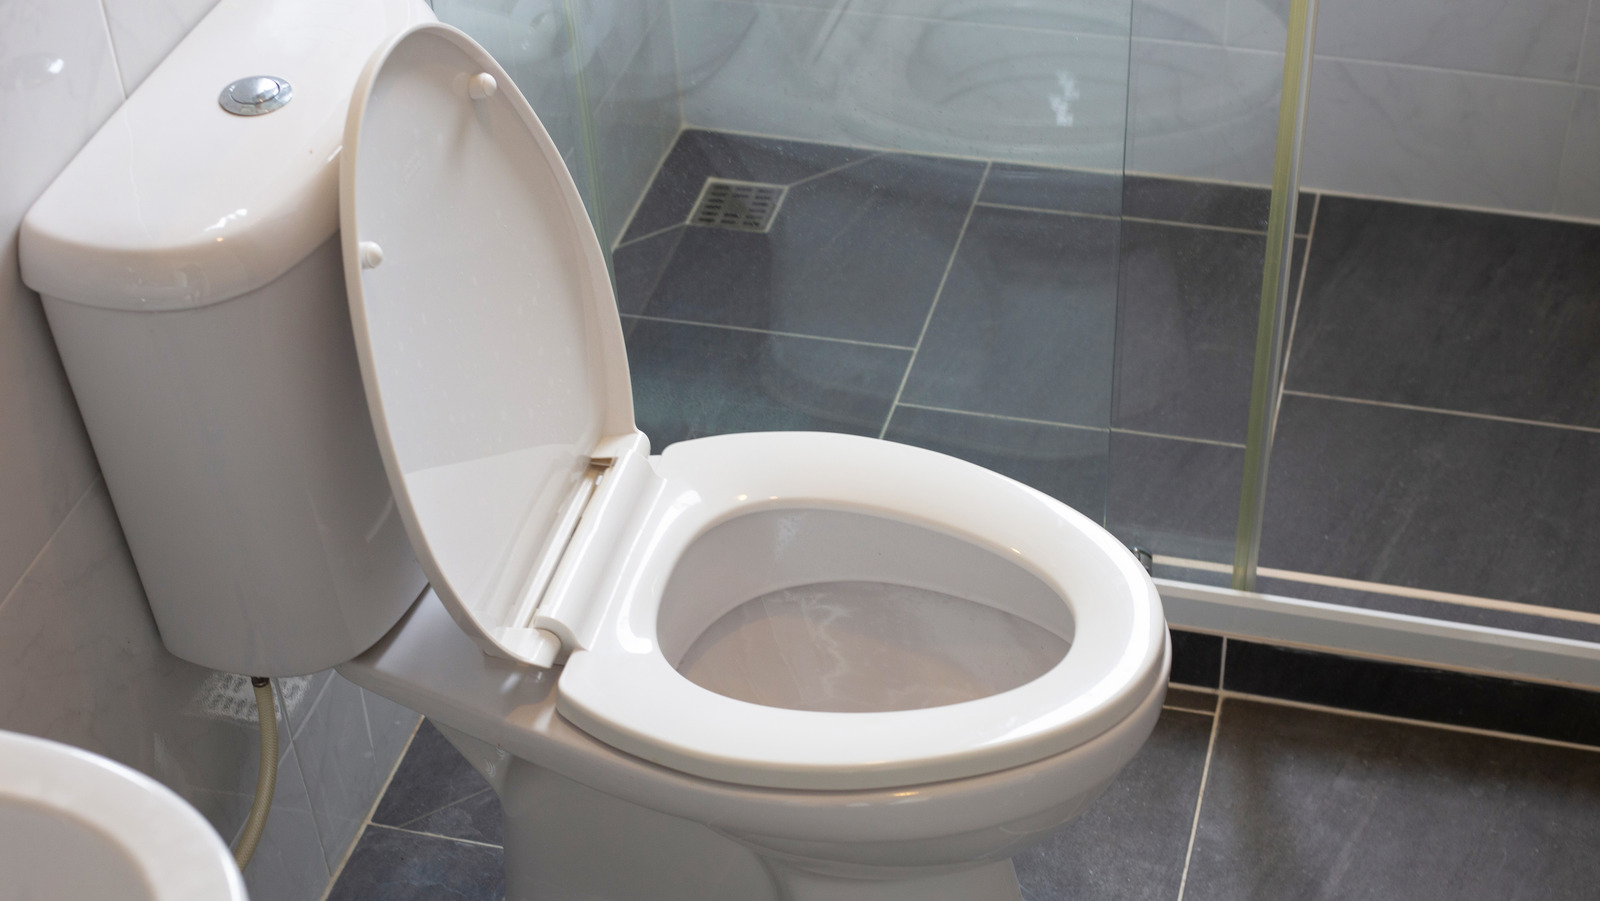 What Causes Clear Slime In Toilet Bowl